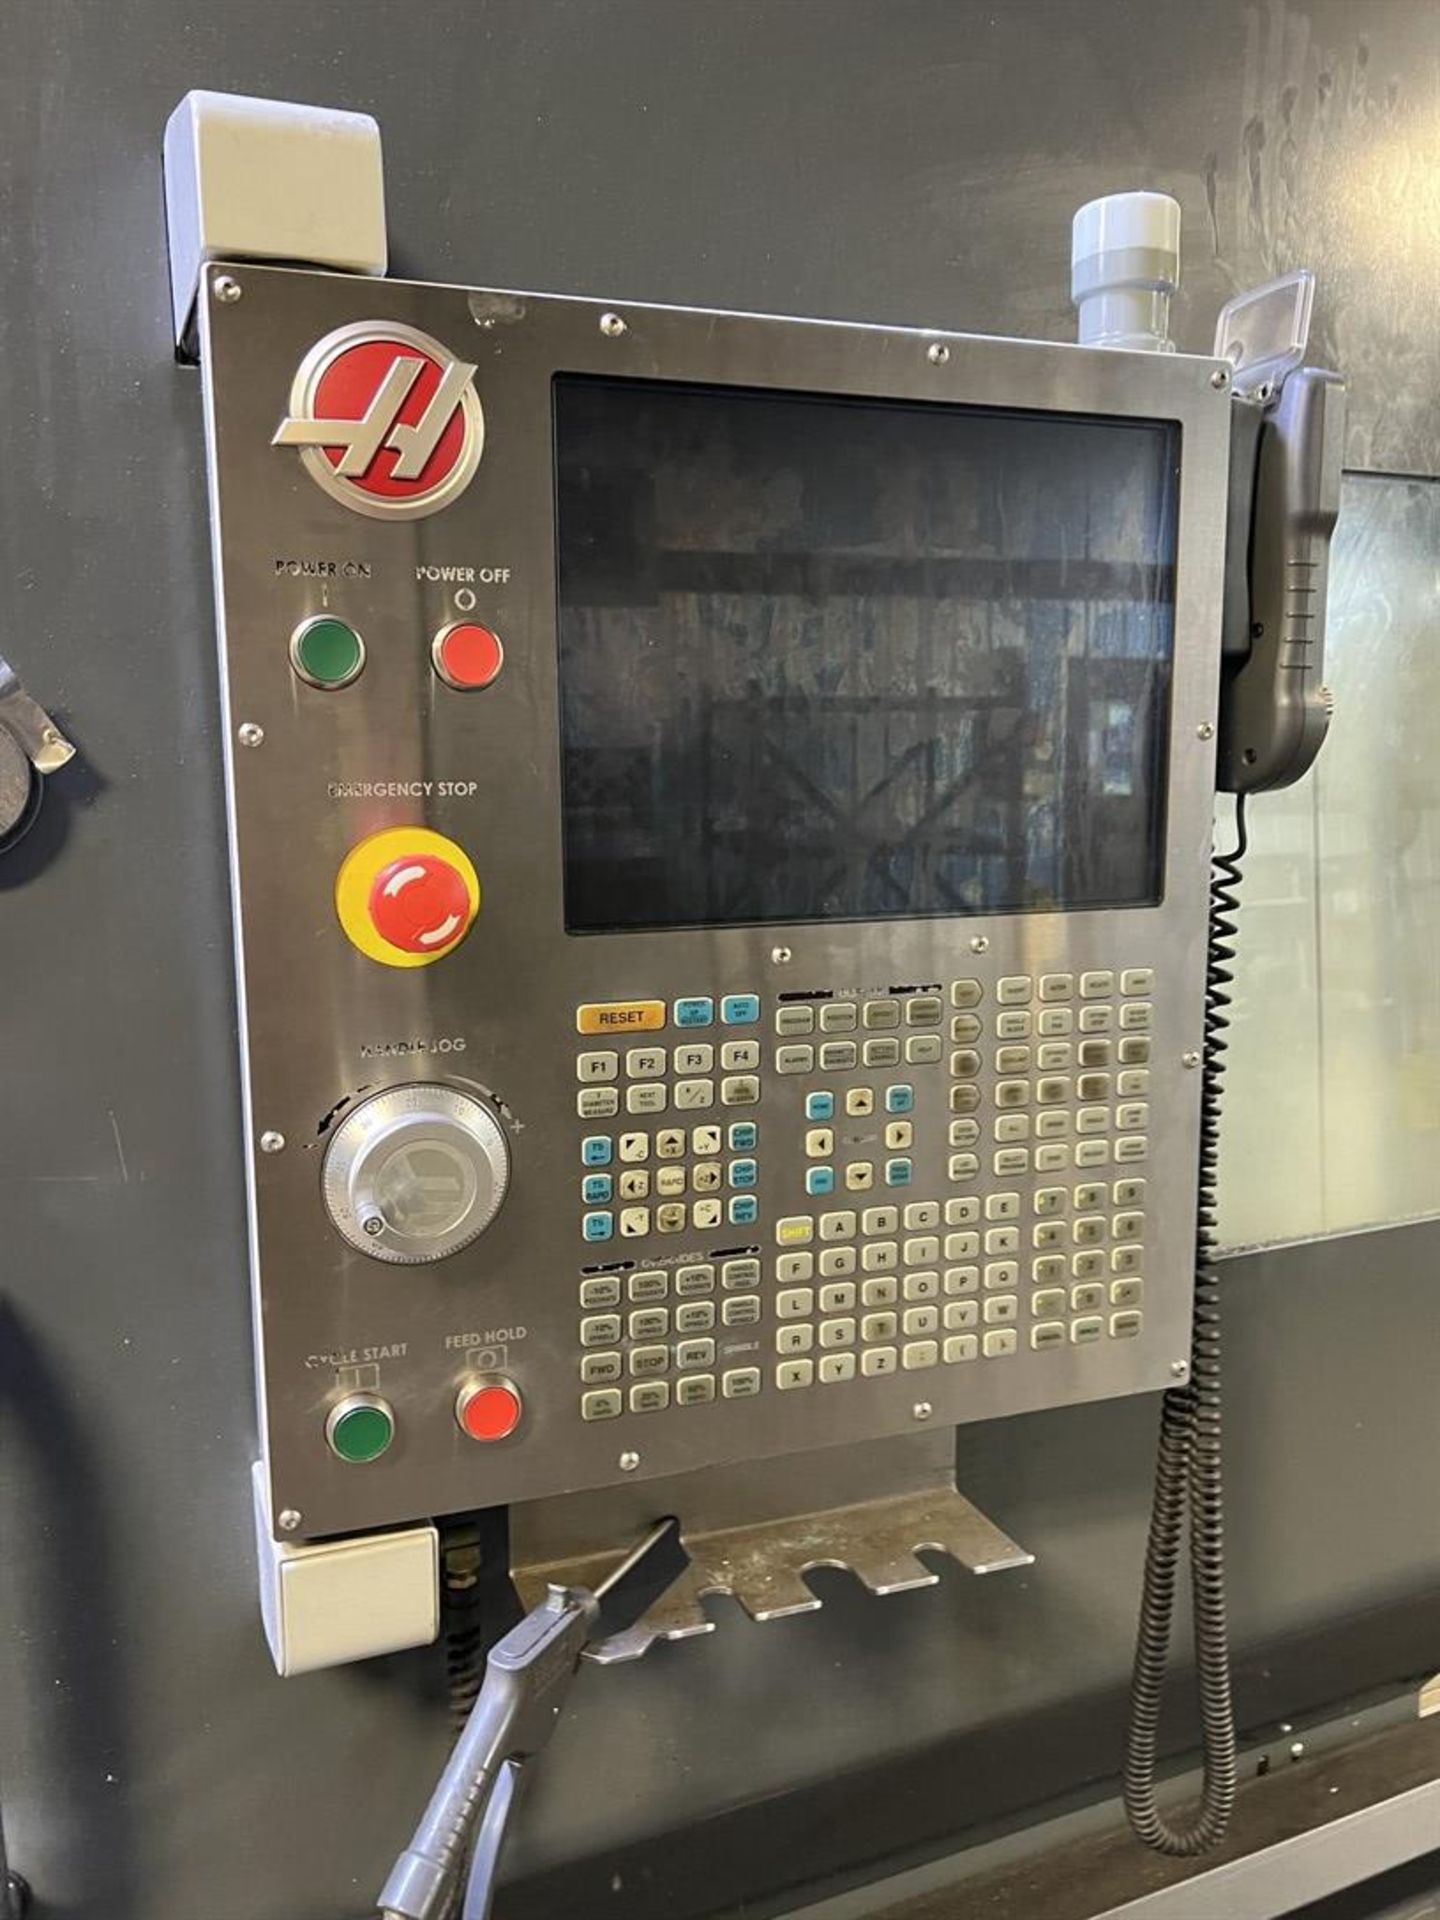 2014 HAAS ST-45L Turning Center, s/n 3099558, HAAS CNC Control, 19.5" SMW Autoblok 3-Jaw Chuck, 12- - Image 9 of 11